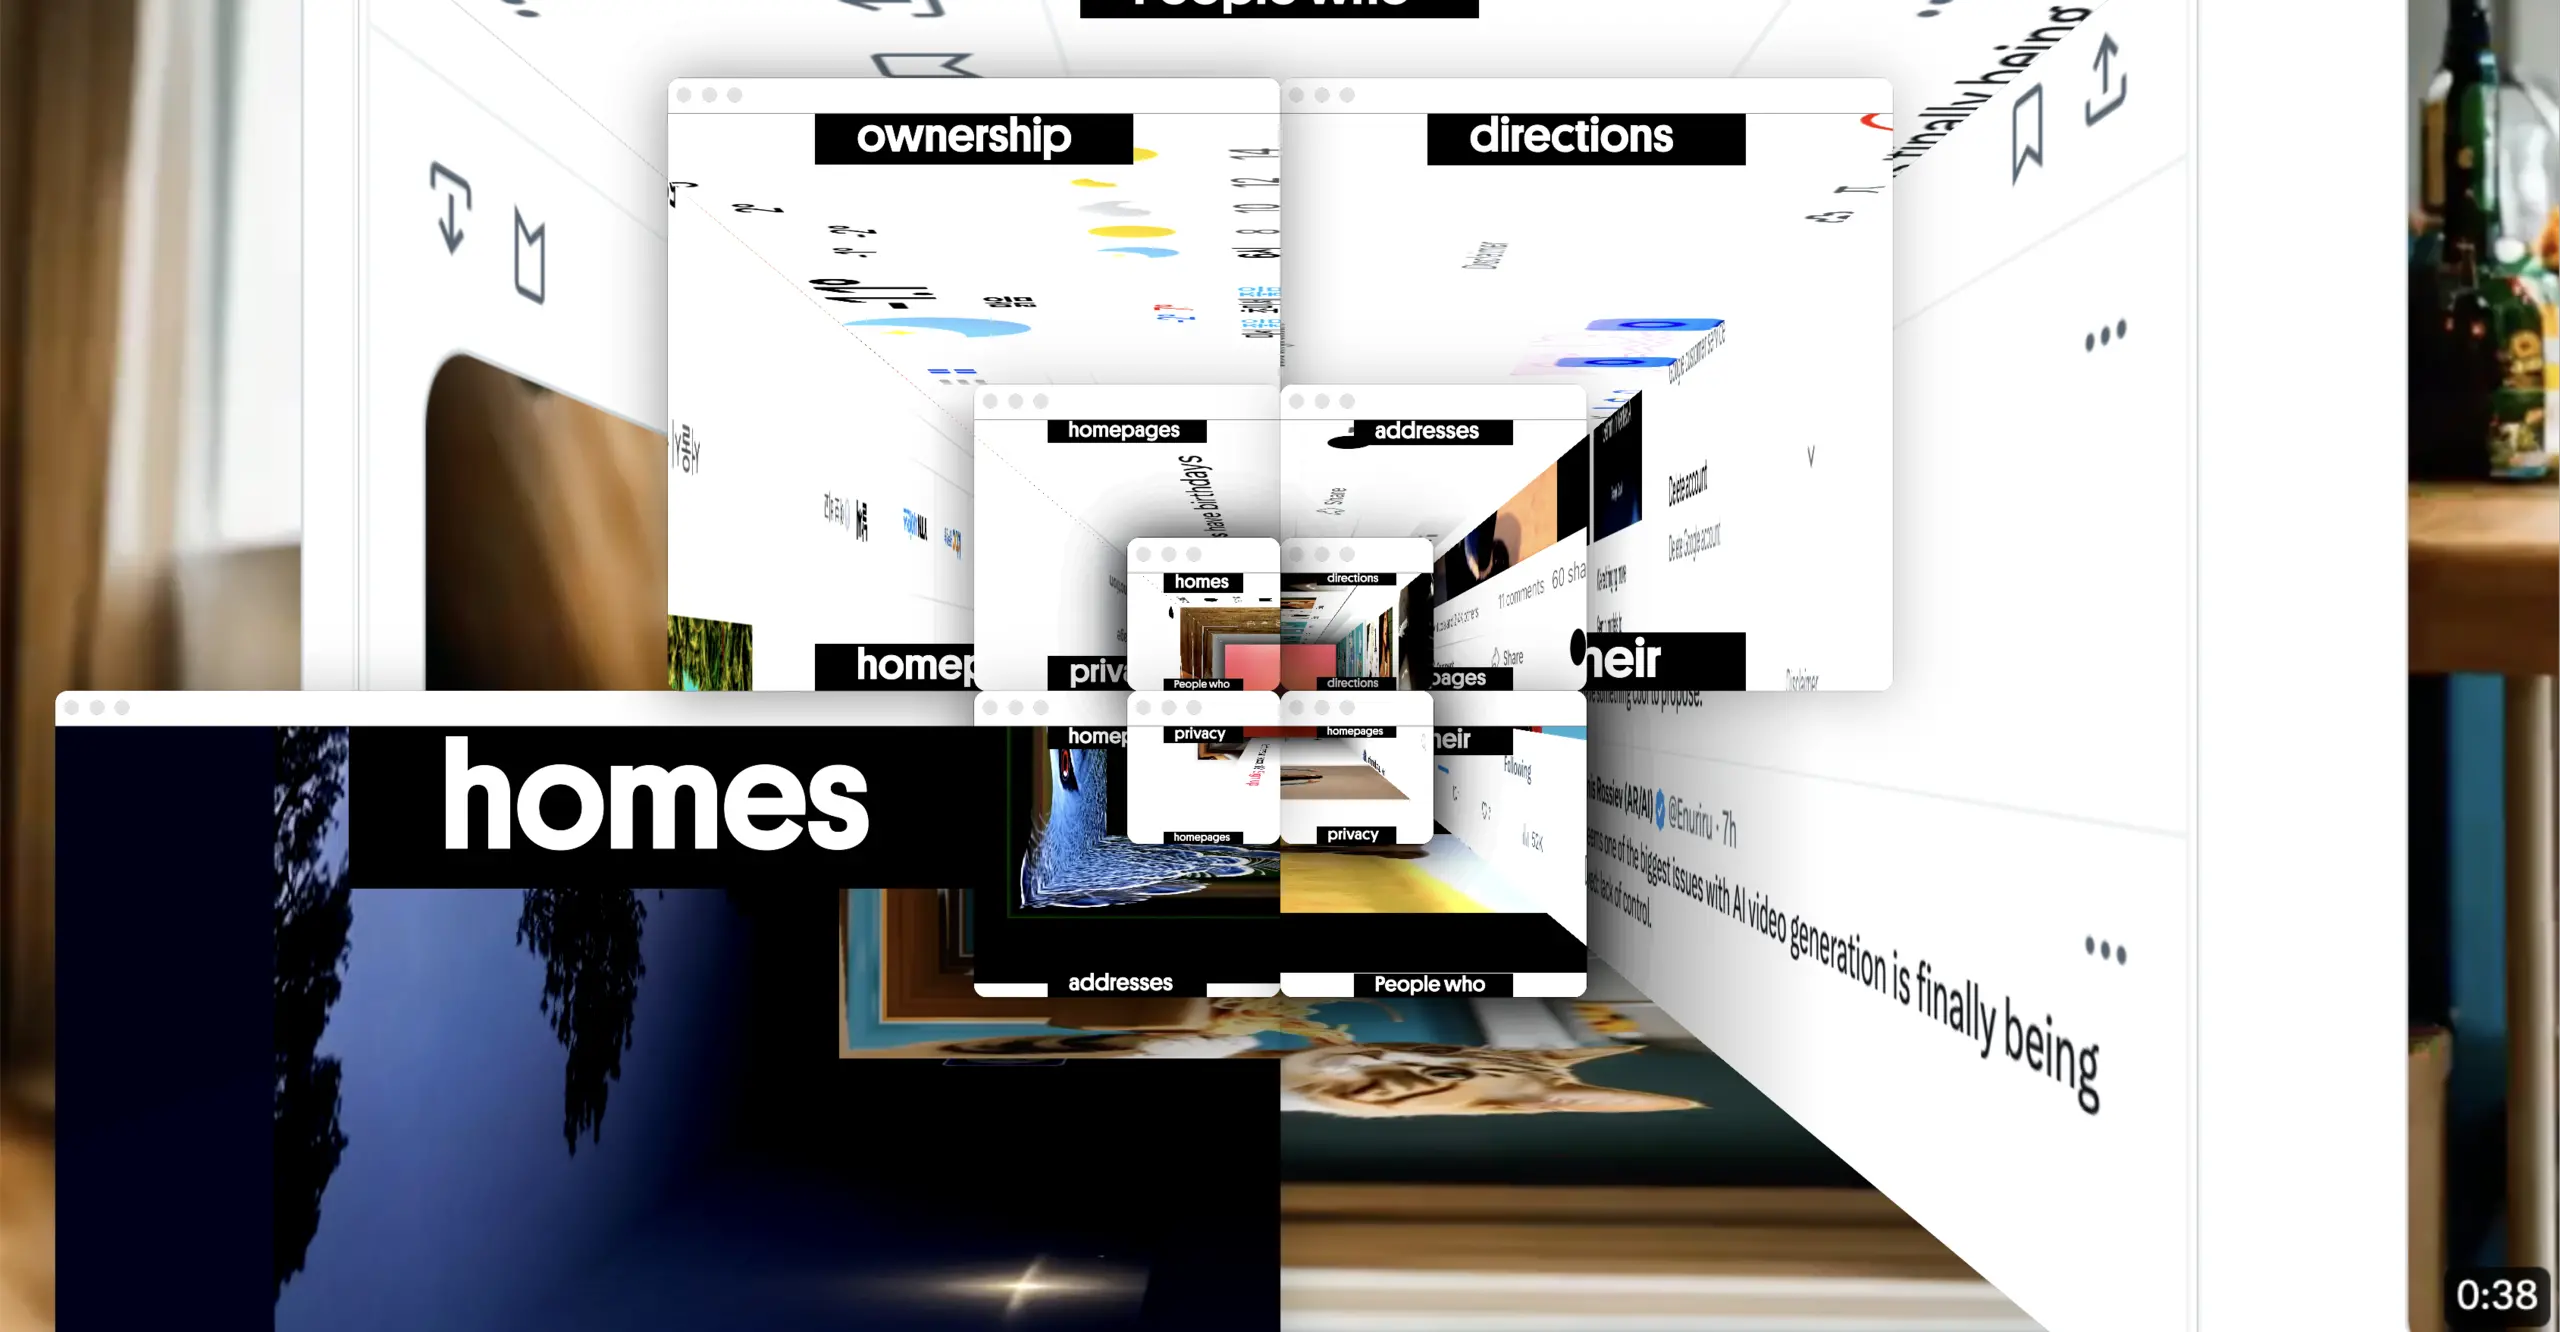 A screen grab of multiple windows in a perspective grid. Each window has a word and image within it.